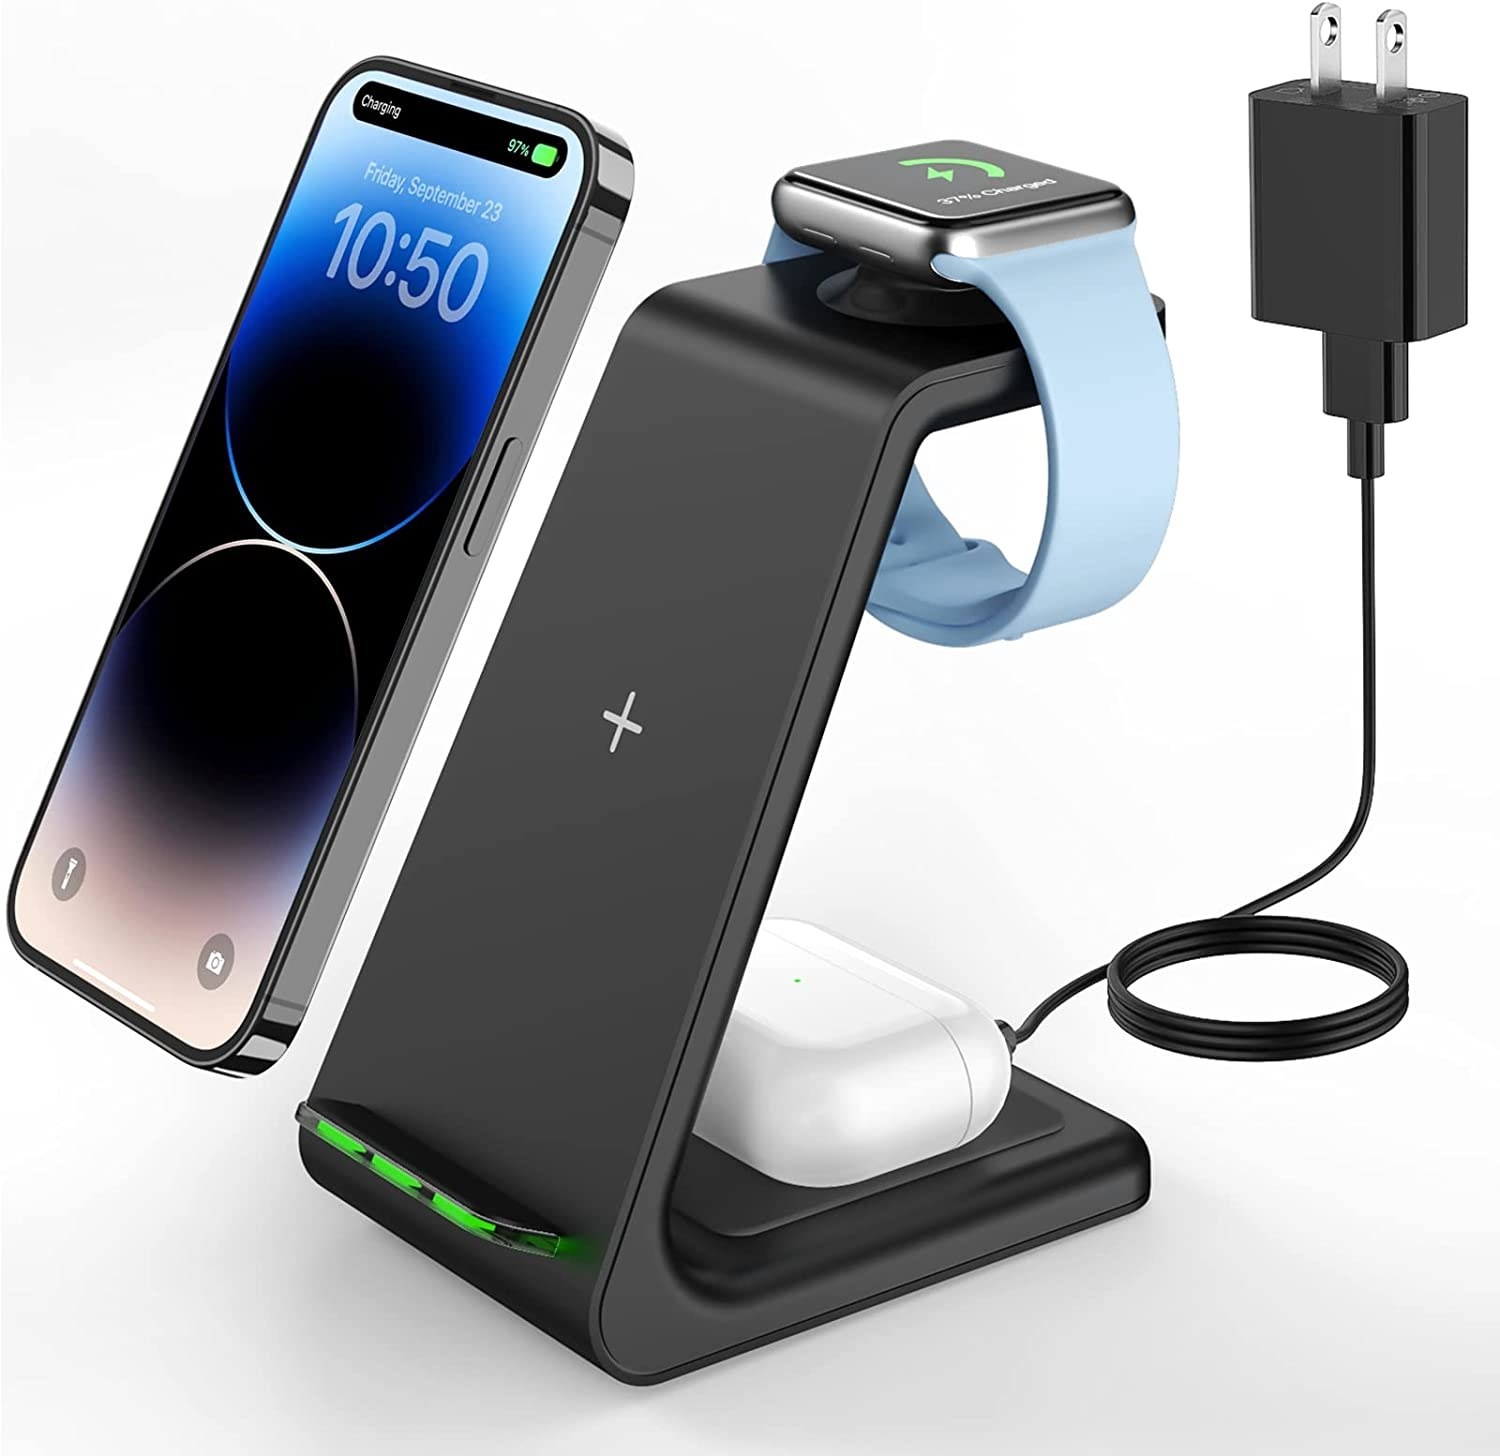 a three in one charger with space for a phone, watch, and headphone case to charge